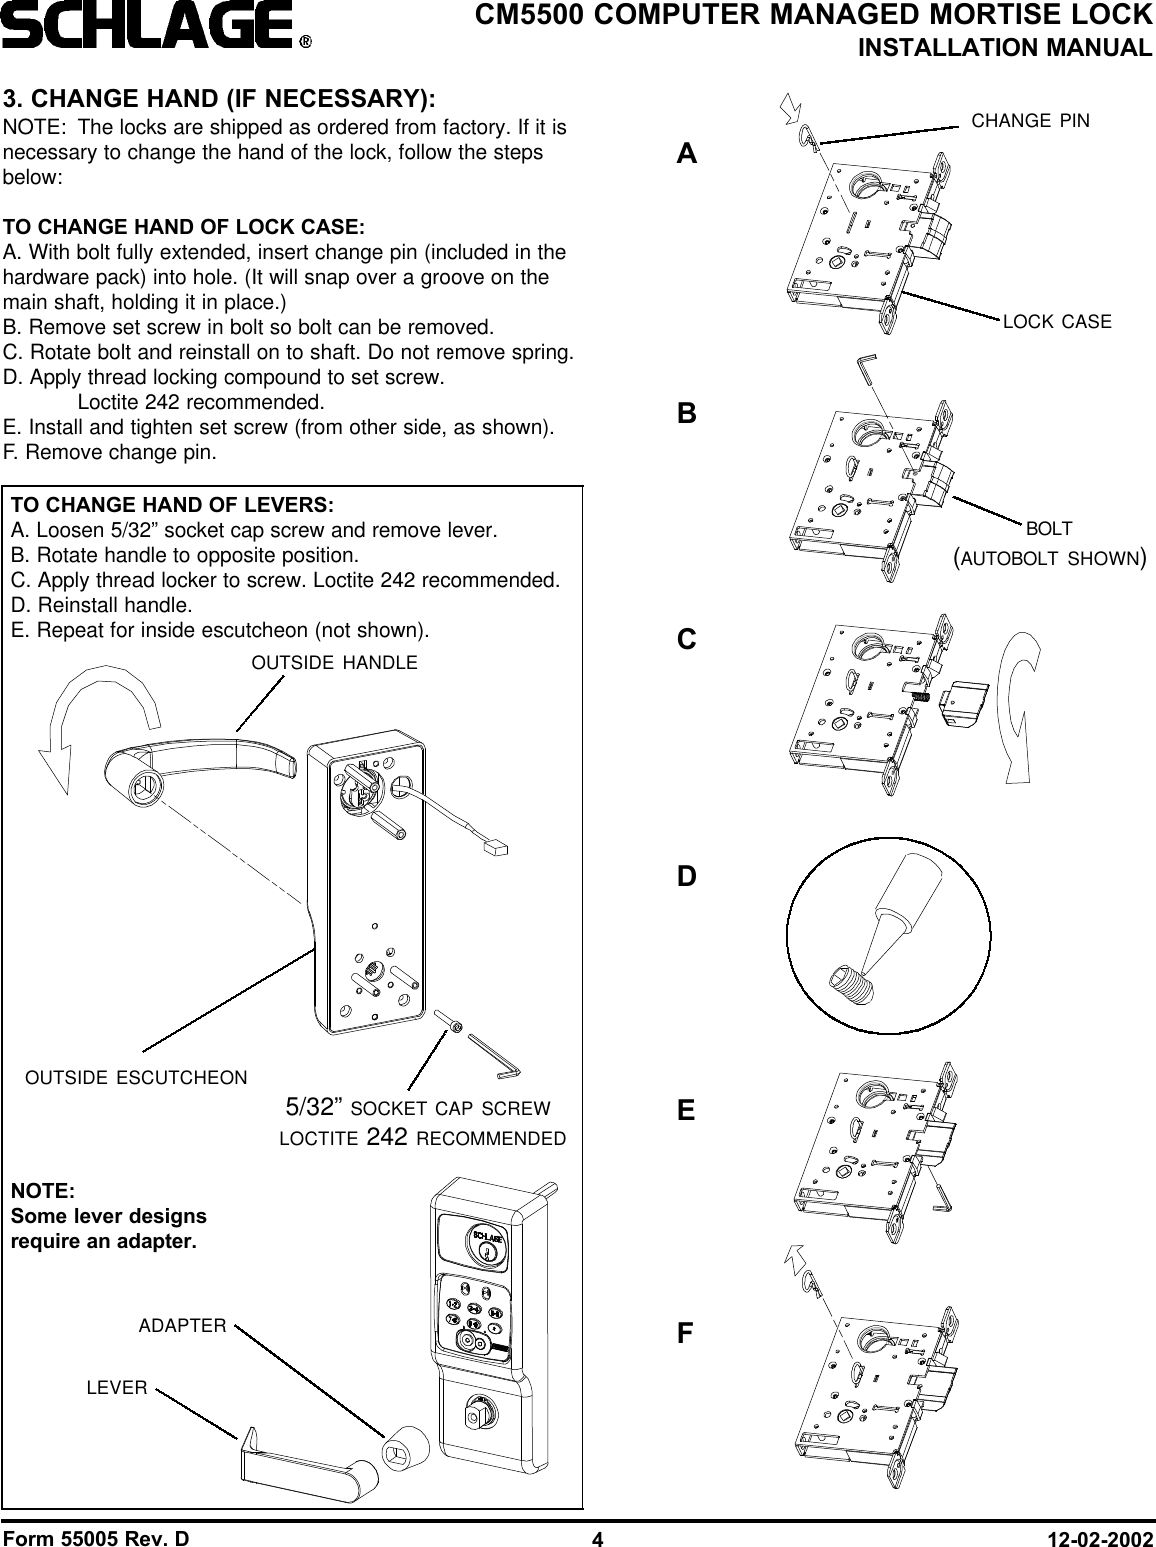 Form 55005 Rev. D 12-02-20024CM5500 COMPUTER MANAGED MORTISE LOCKINSTALLATION MANUAL3. CHANGE HAND (IF NECESSARY):NOTE: The locks are shipped as ordered from factory. If it isnecessary to change the hand of the lock, follow the stepsbelow:TO CHANGE HAND OF LOCK CASE:A. With bolt fully extended, insert change pin (included in thehardware pack) into hole. (It will snap over a groove on themain shaft, holding it in place.)B. Remove set screw in bolt so bolt can be removed.C. Rotate bolt and reinstall on to shaft. Do not remove spring.D. Apply thread locking compound to set screw. Loctite 242 recommended.E. Install and tighten set screw (from other side, as shown).F. Remove change pin.5/32” SOCKET CAP SCREWLOCTITE 242 RECOMMENDEDOUTSIDE ESCUTCHEONADAPTERLEVEROUTSIDE HANDLECHANGE PINLOCK CASEBOLT(AUTOBOLT SHOWN)TO CHANGE HAND OF LEVERS:A. Loosen 5/32” socket cap screw and remove lever.B. Rotate handle to opposite position.C. Apply thread locker to screw. Loctite 242 recommended.D. Reinstall handle.E. Repeat for inside escutcheon (not shown).NOTE: Some lever designsrequire an adapter.ABCEDF